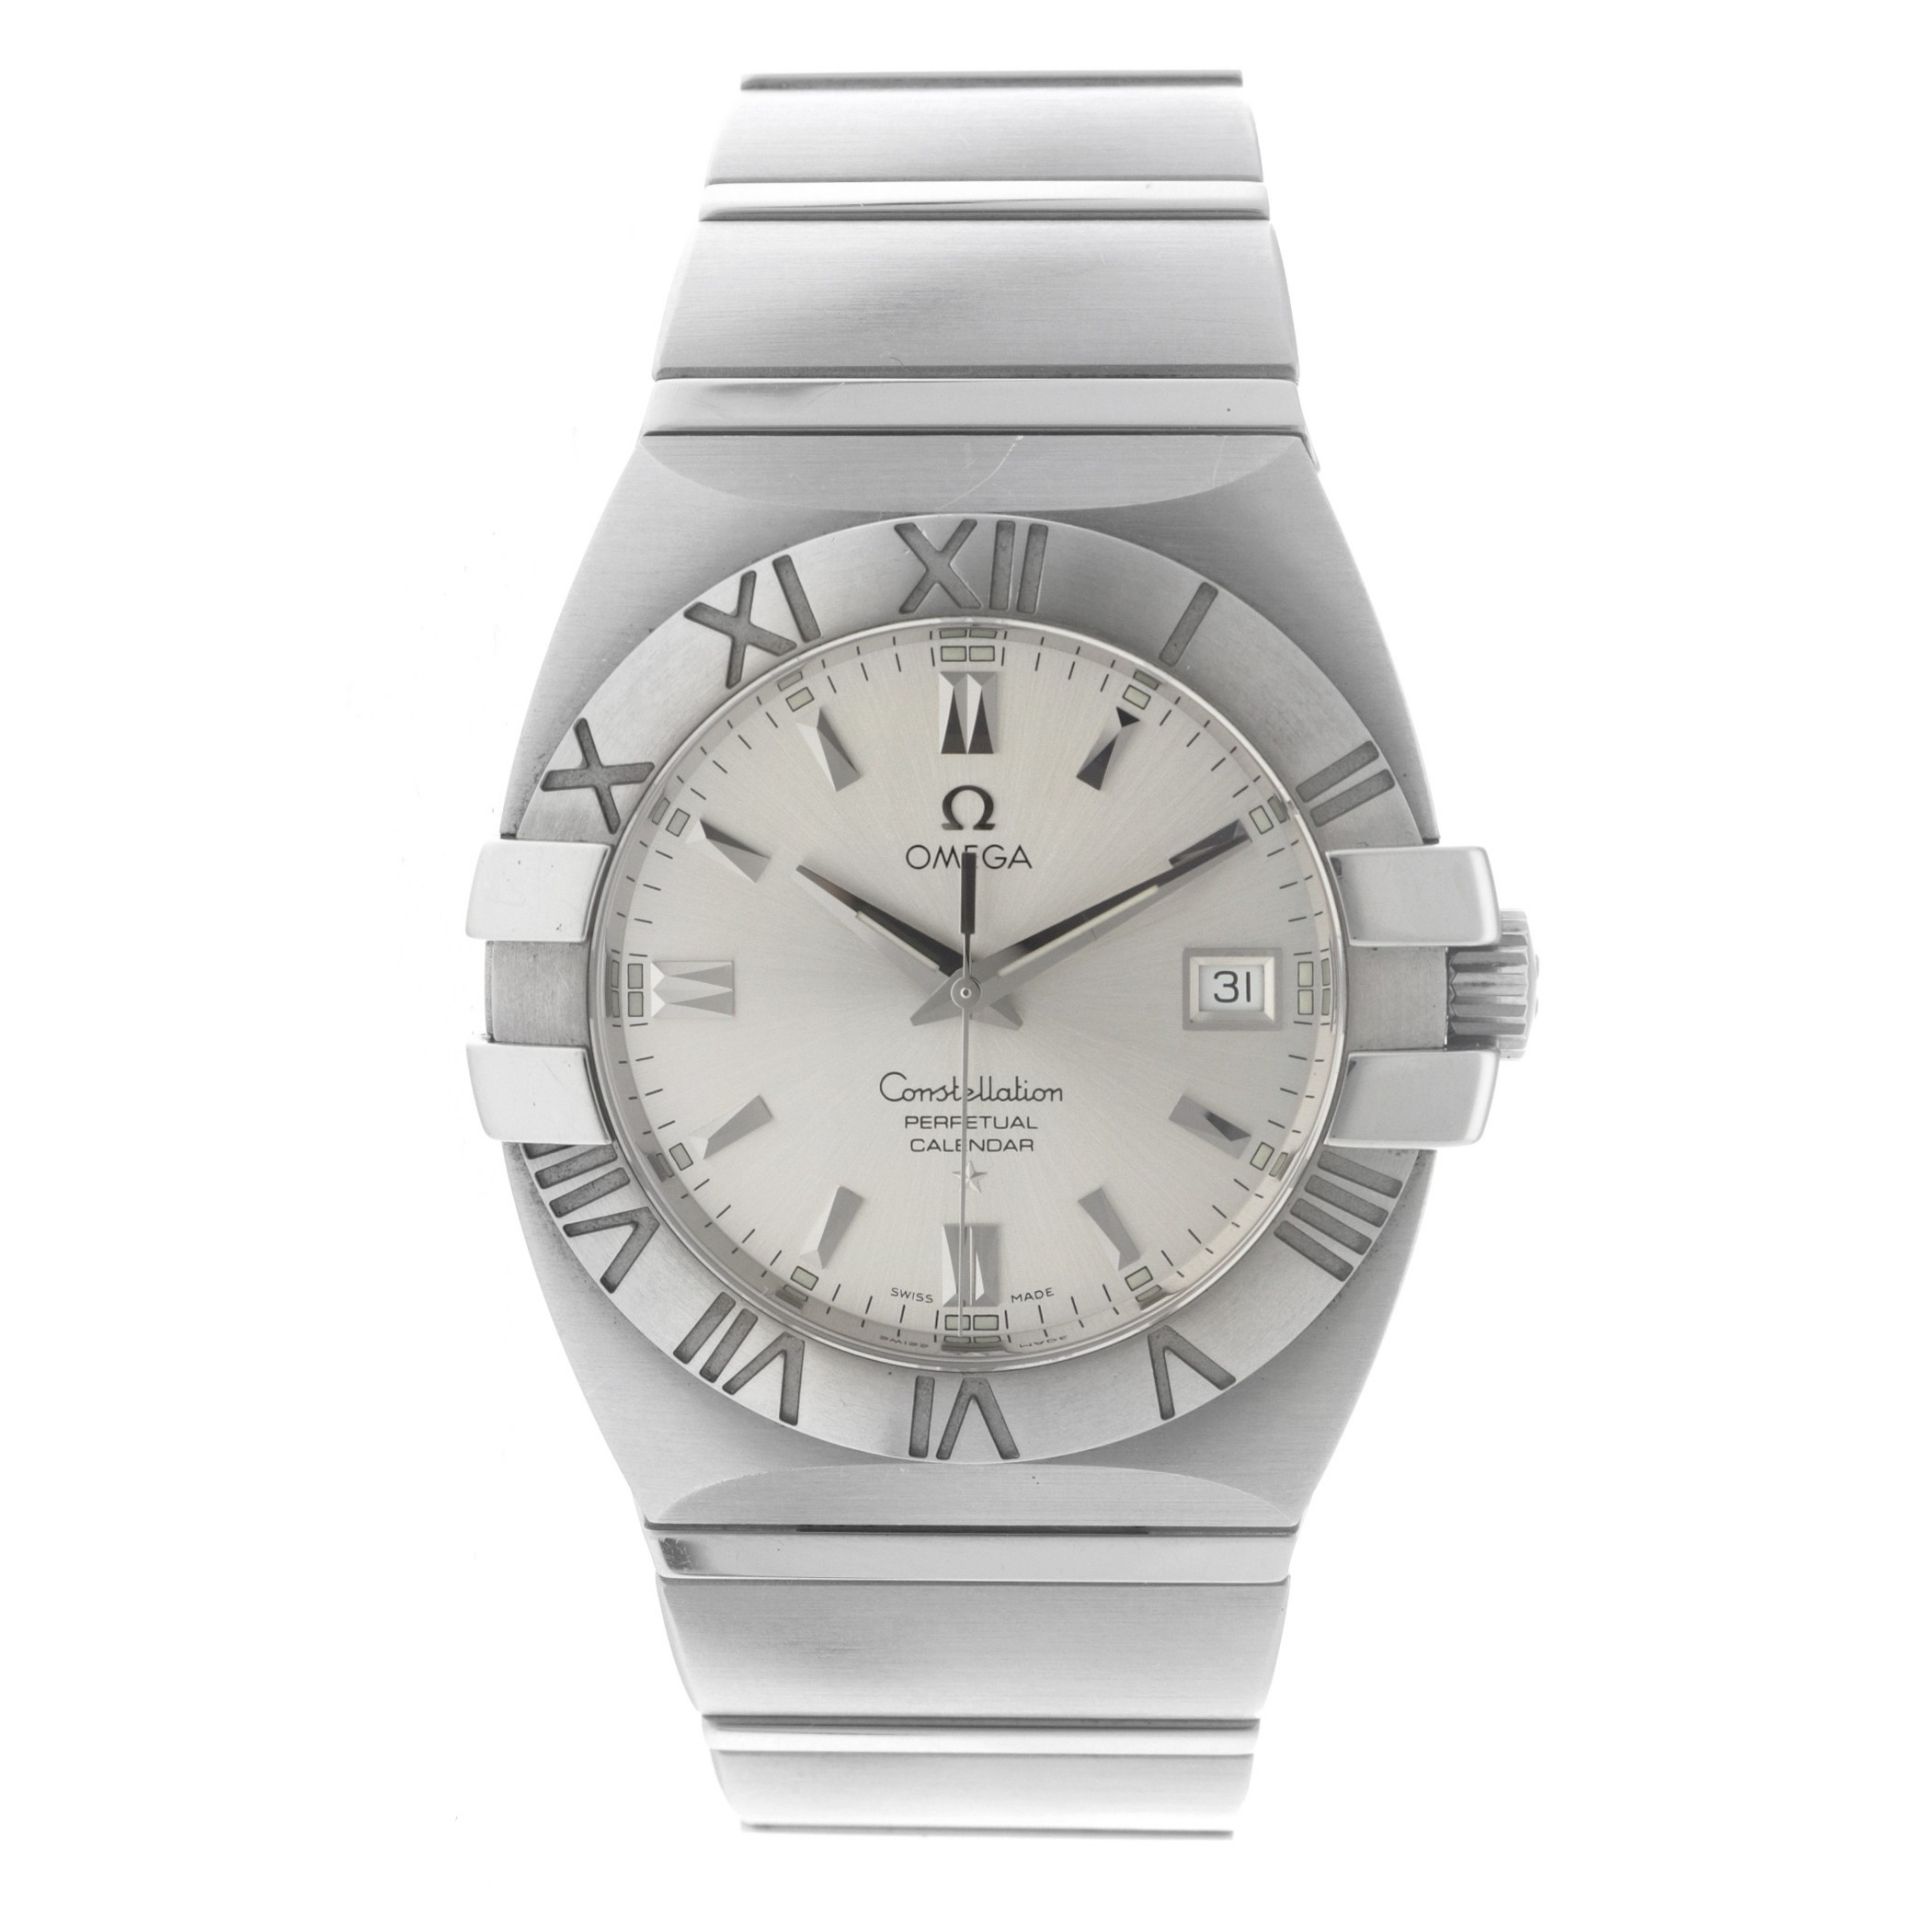 No Reserve - Omega Constellation Perpetual Calender 396.1203 - Men's watch.